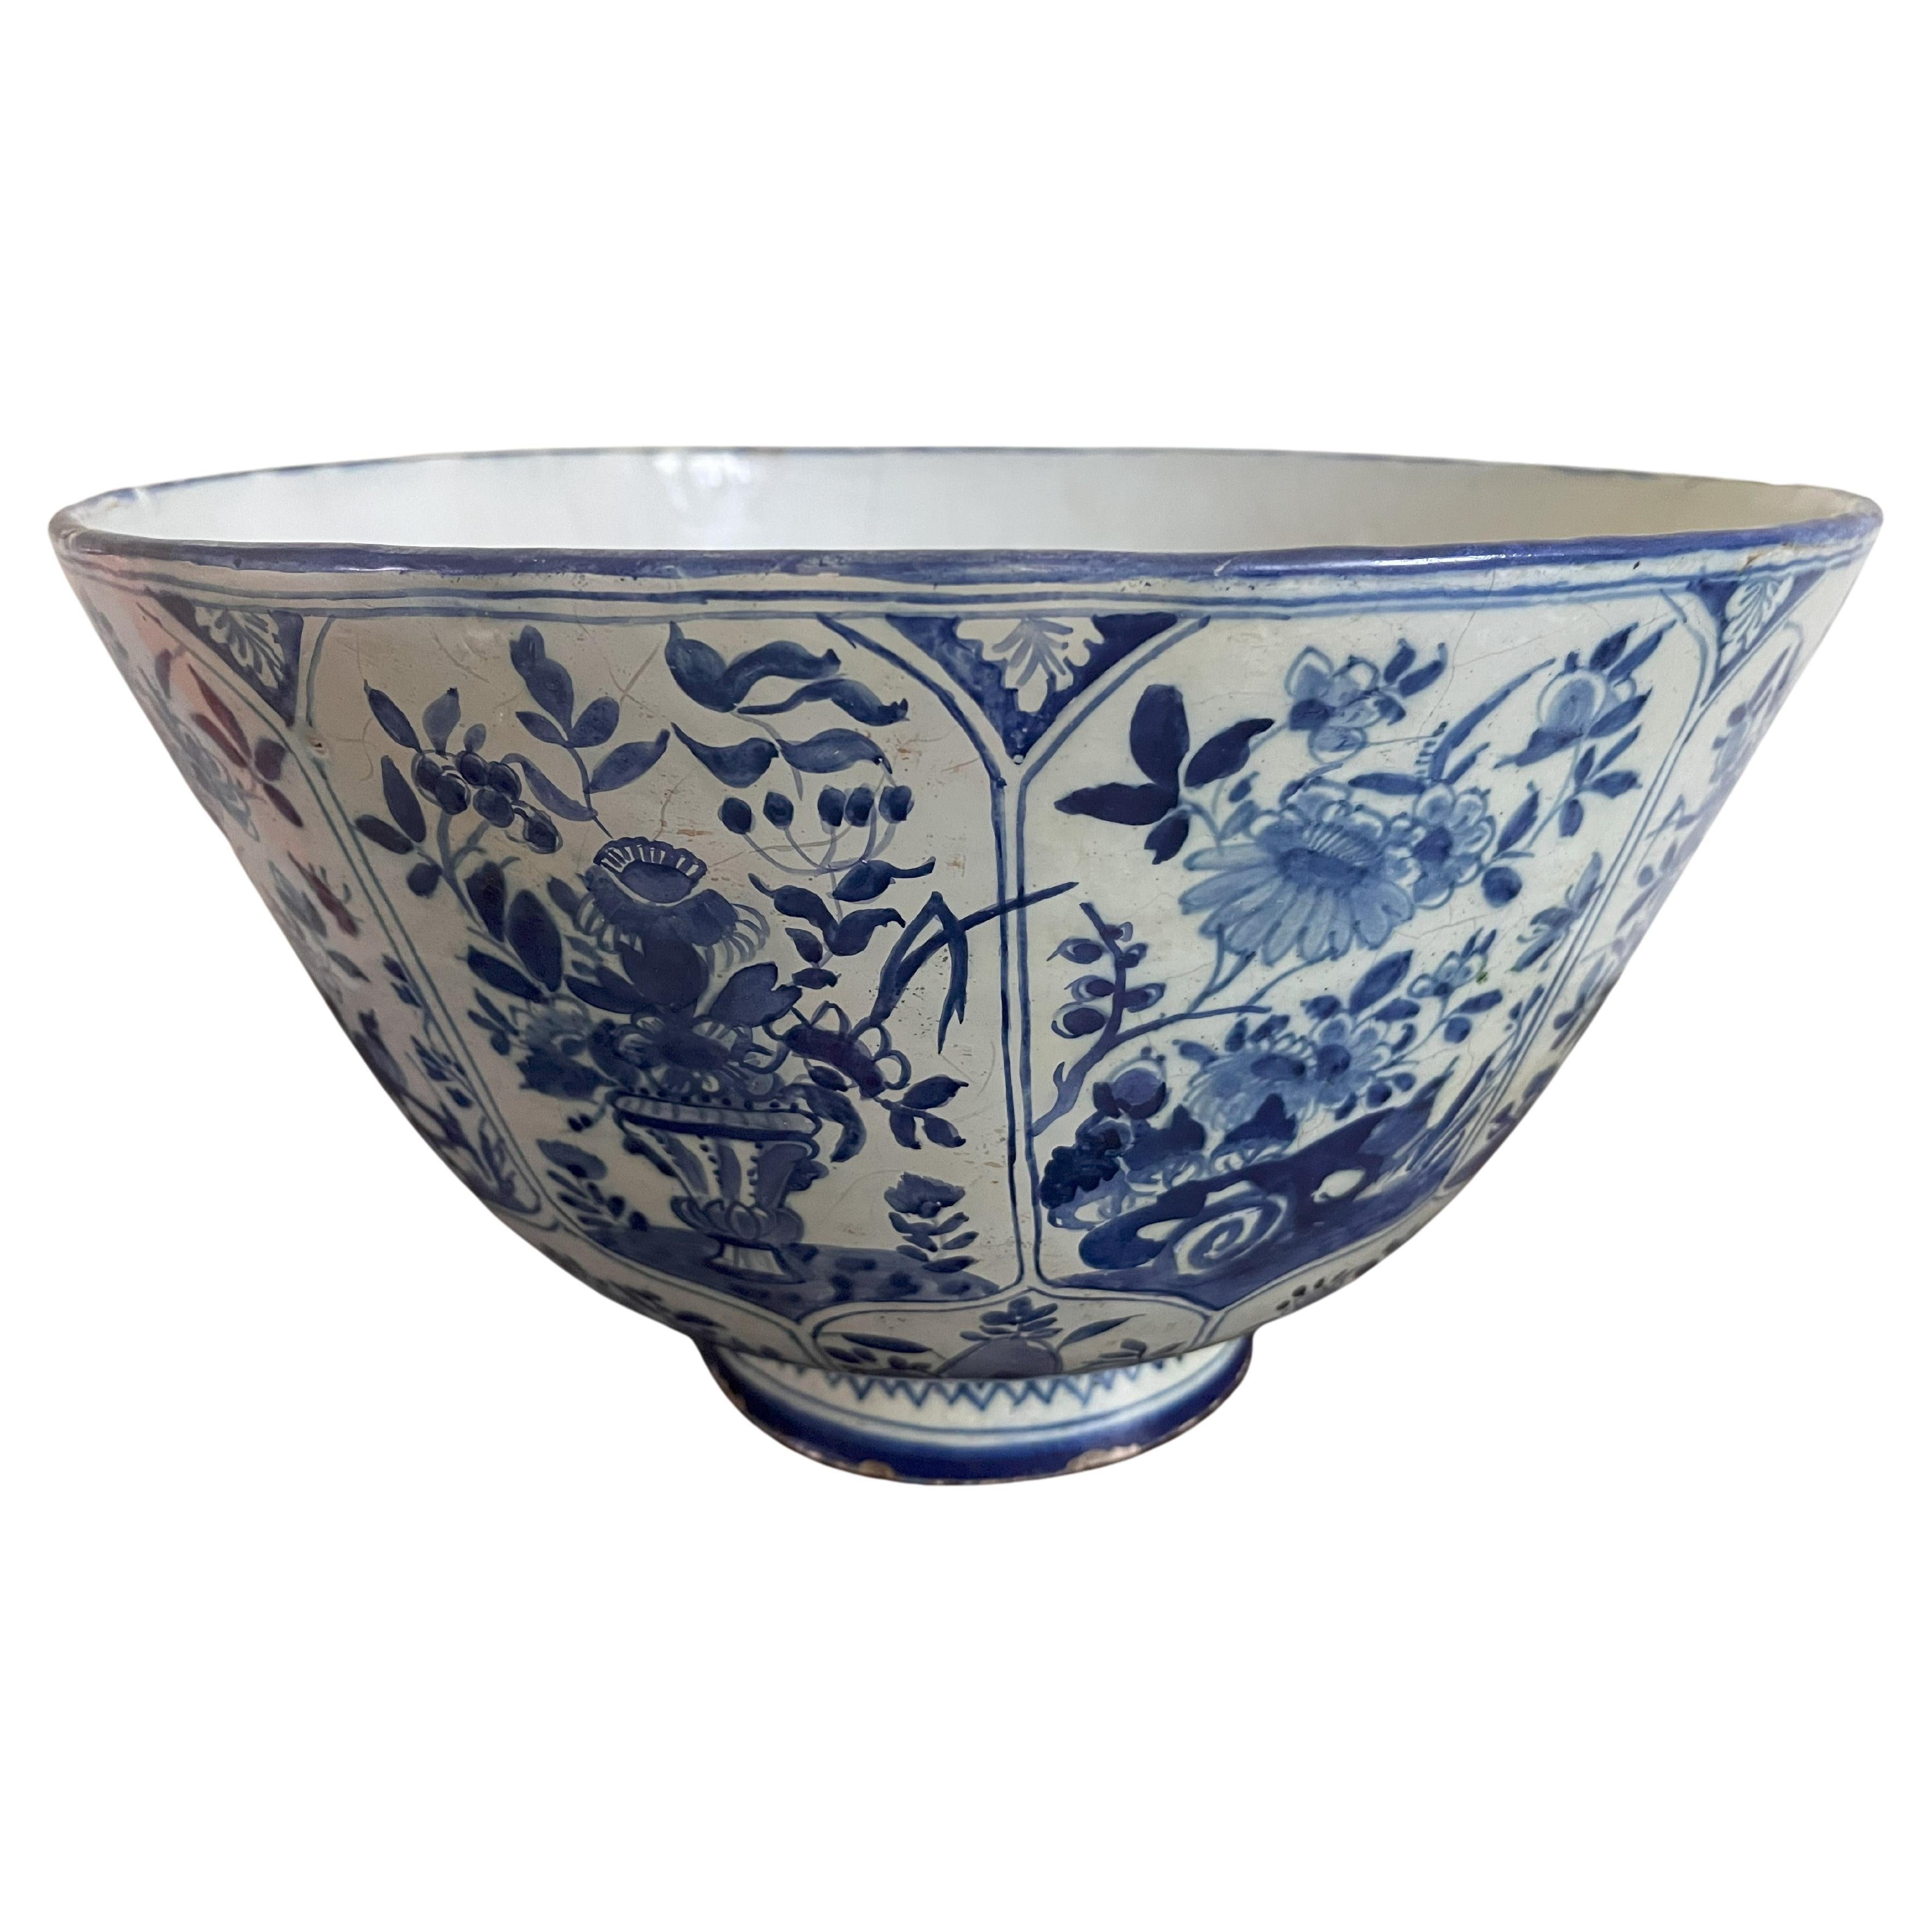 Large Delft Blue And White Punch Bowl - 18th Century For Sale